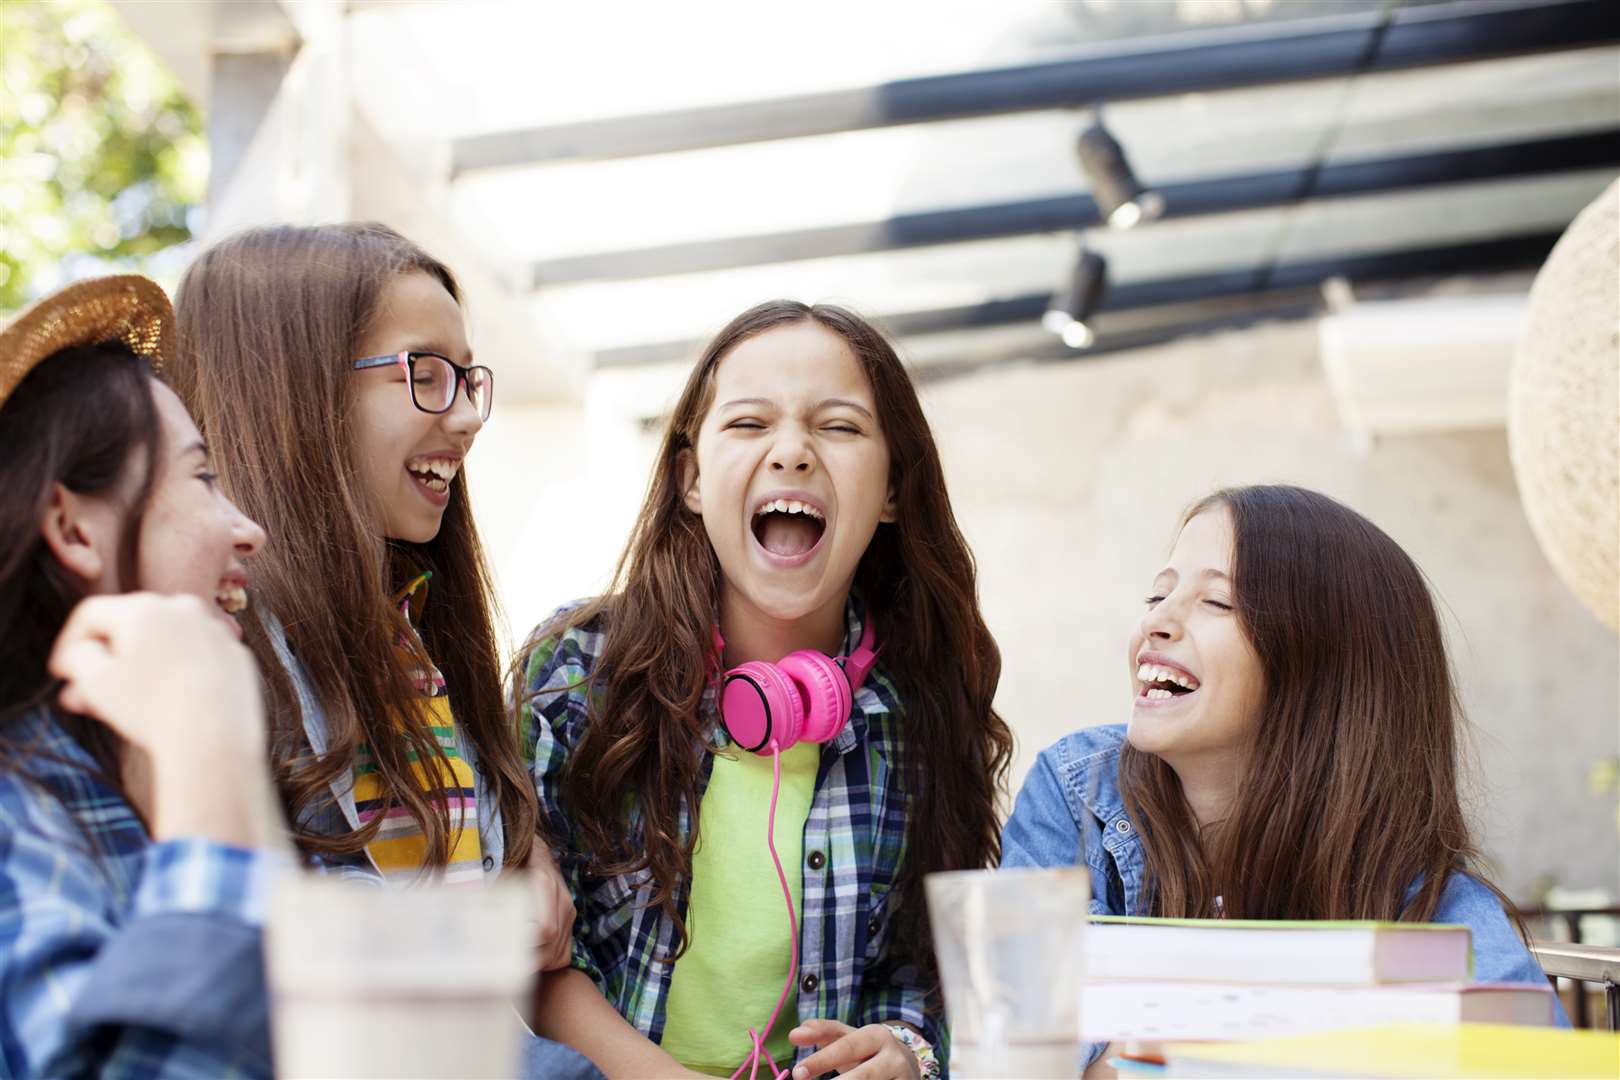 Research shows most teens feel good about themselves. Picture PA/Thinkstock Photos